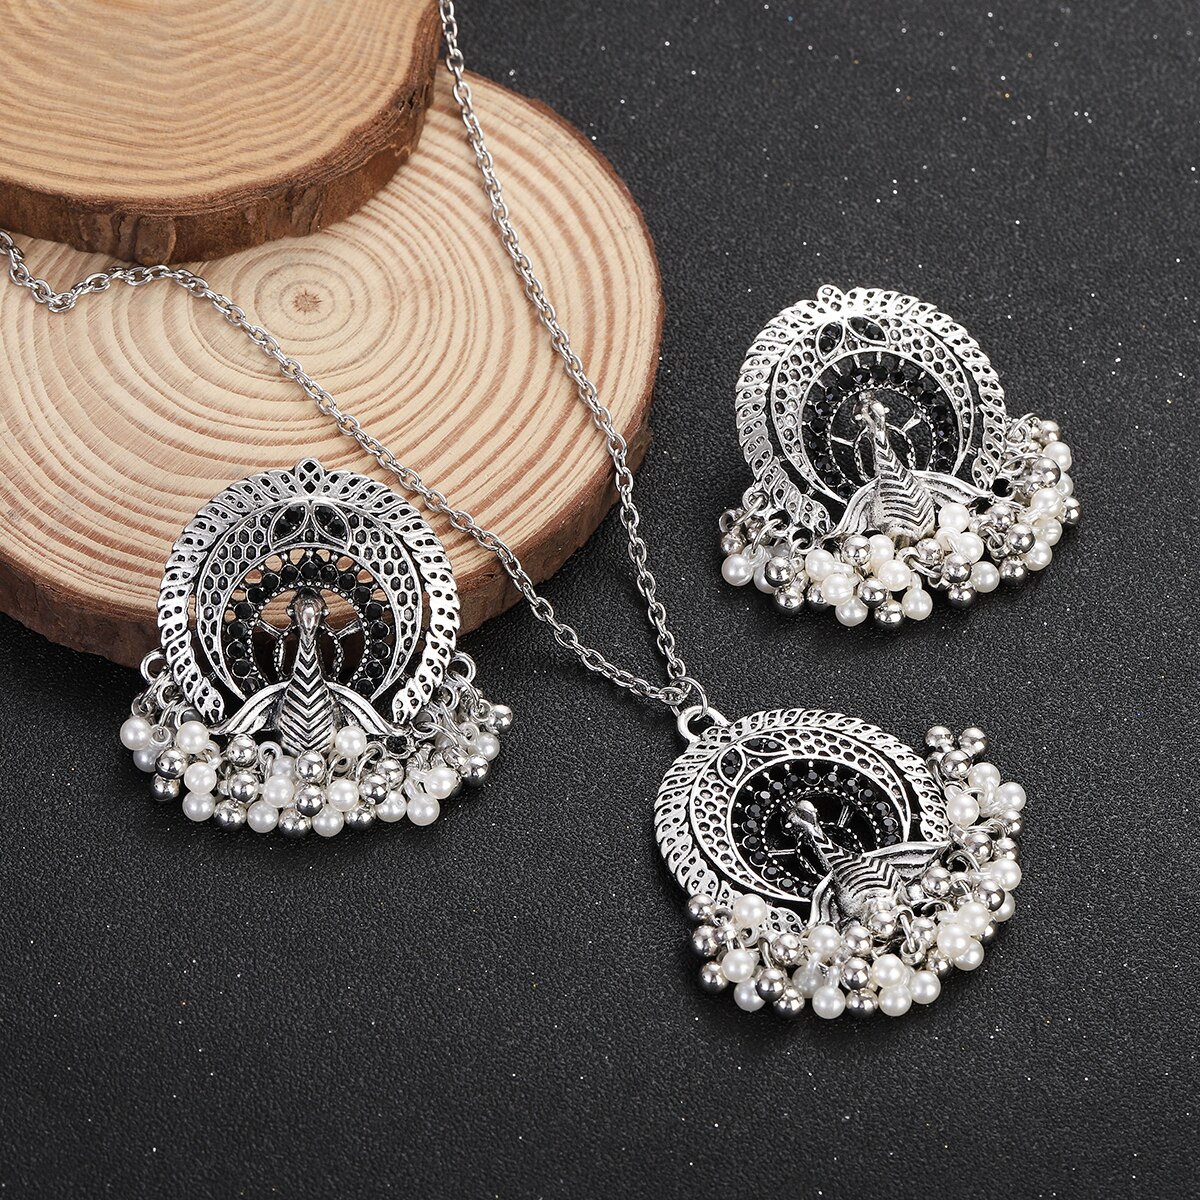 Vintage-Silver-Color-Jewelry-Sets-for-Women-Accessories-Ethnic-Geometric-Peacock-Crystal-Pendant-Nec-1005004941302824-3